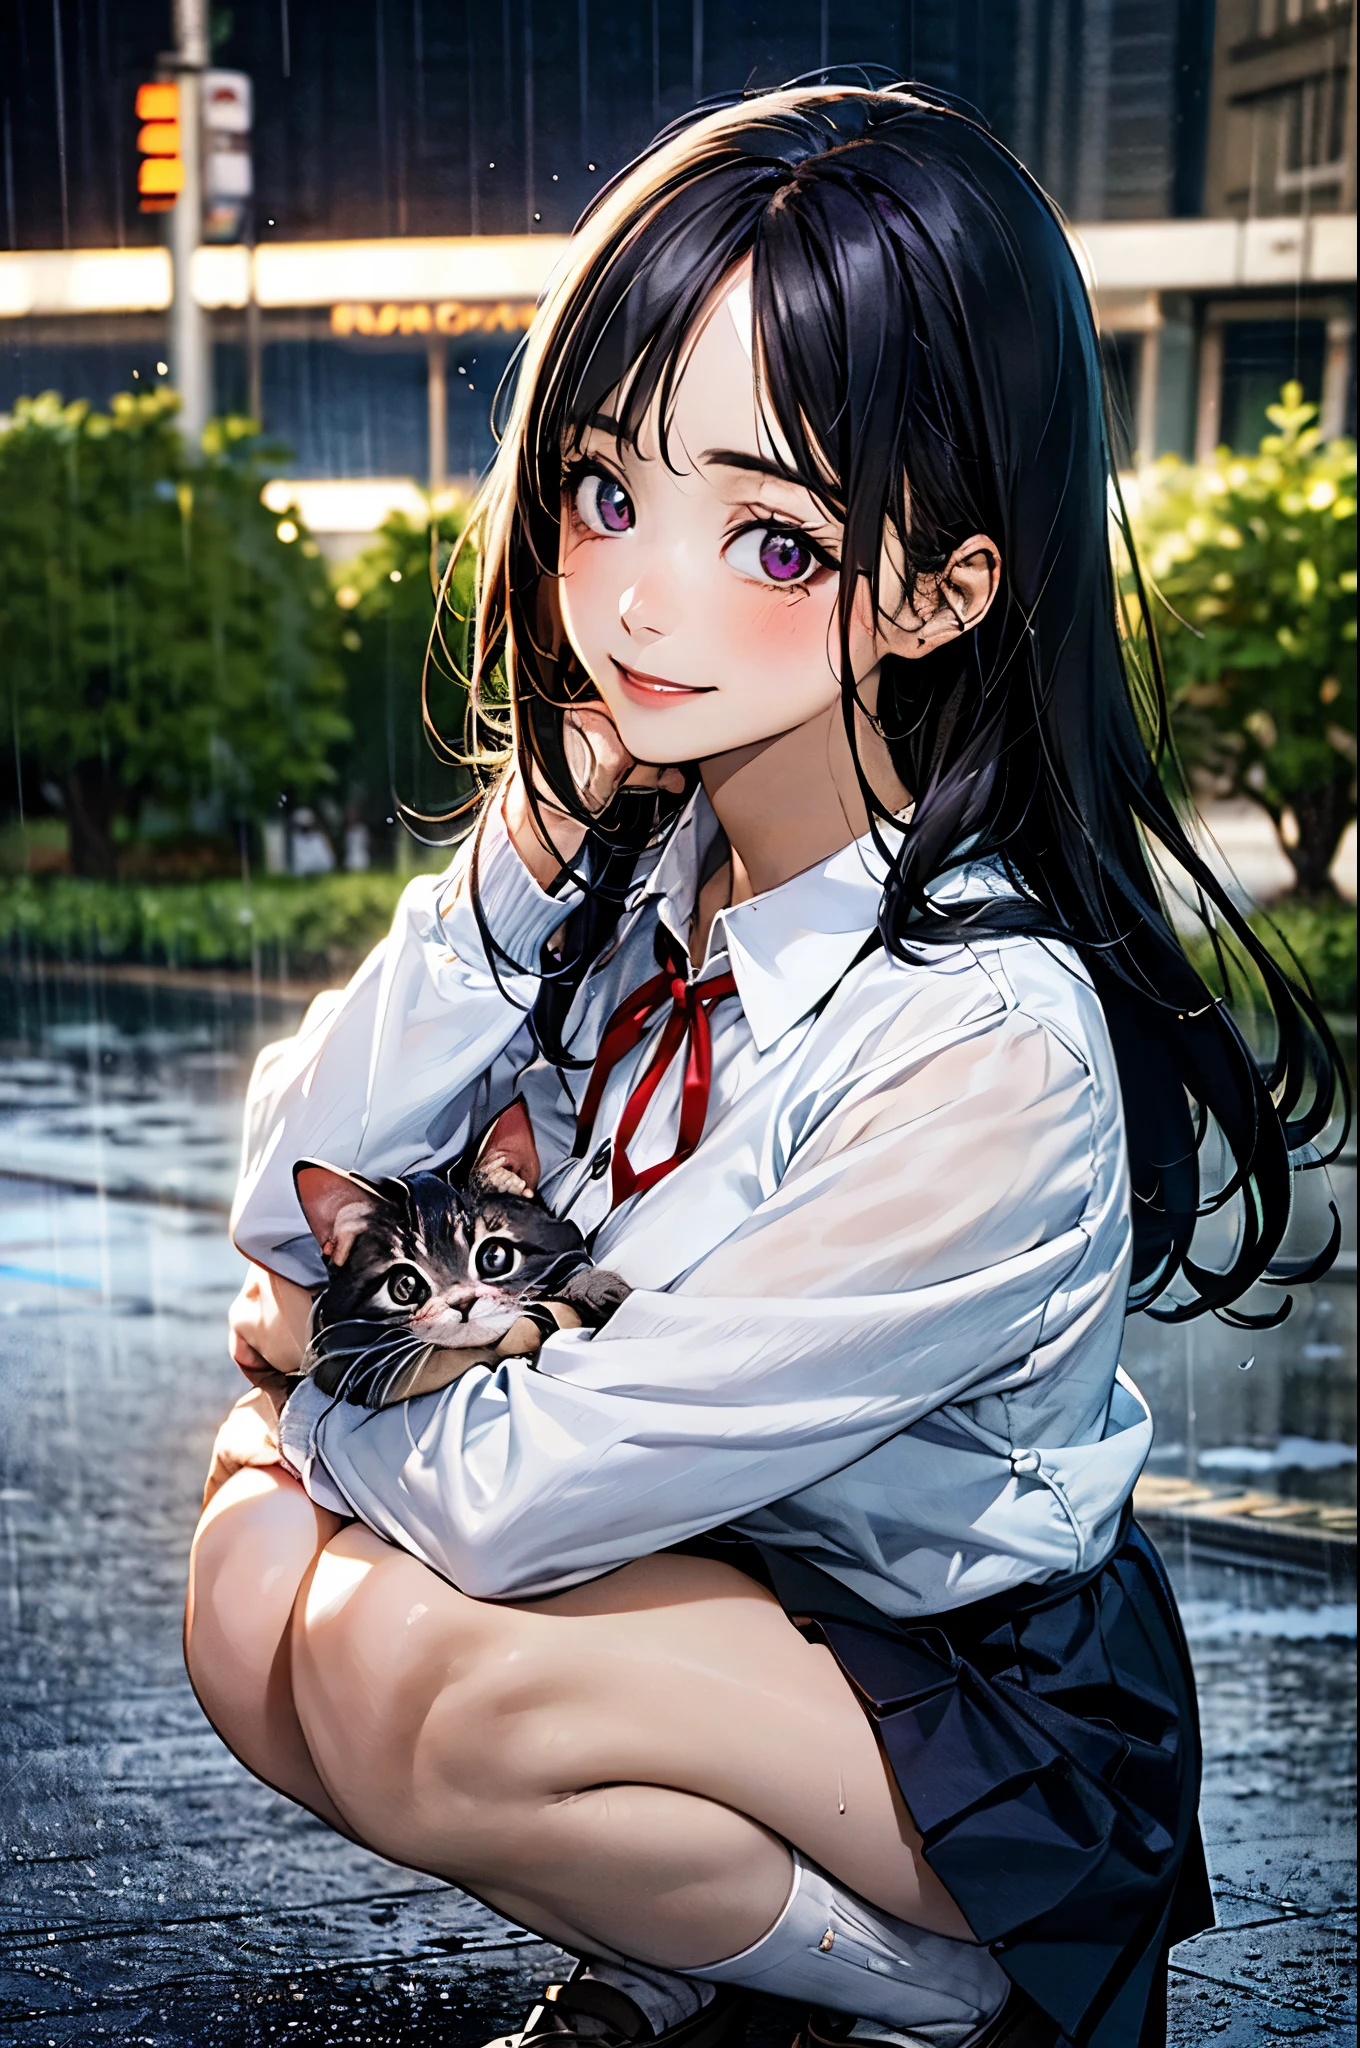 (masterpiece:1.2, top-quality), (realistic, photorealistic:1.4), beautiful illustration, (natural side lighting, movie lighting), , 
(looking at viewer), 1 girl, japanese, high school girl, perfect face, cute and symmetrical face, shiny skin, skinny, 
(long hair, straight hair, black hair), swept bangs, long sidelocks, datk purple eyes, drooping eyes, long eye lasher, (large breasts:0.6), five fingers, 
beautiful hair, beautiful face, beautiful detailed eyes, beautiful clavicle, beautiful body, beautiful chest, beautiful thighs, beautiful legs, 
((symmetrical clothing, white collared shirts, navy pleated skirt, red neck ribbon)), light grey cardigan, navy socks, 
(beautiful scenery), mid night, (riverside, rain:1.8, rainy), squatting, ((hugging a cat)), (lovely smile, upper eyes), 